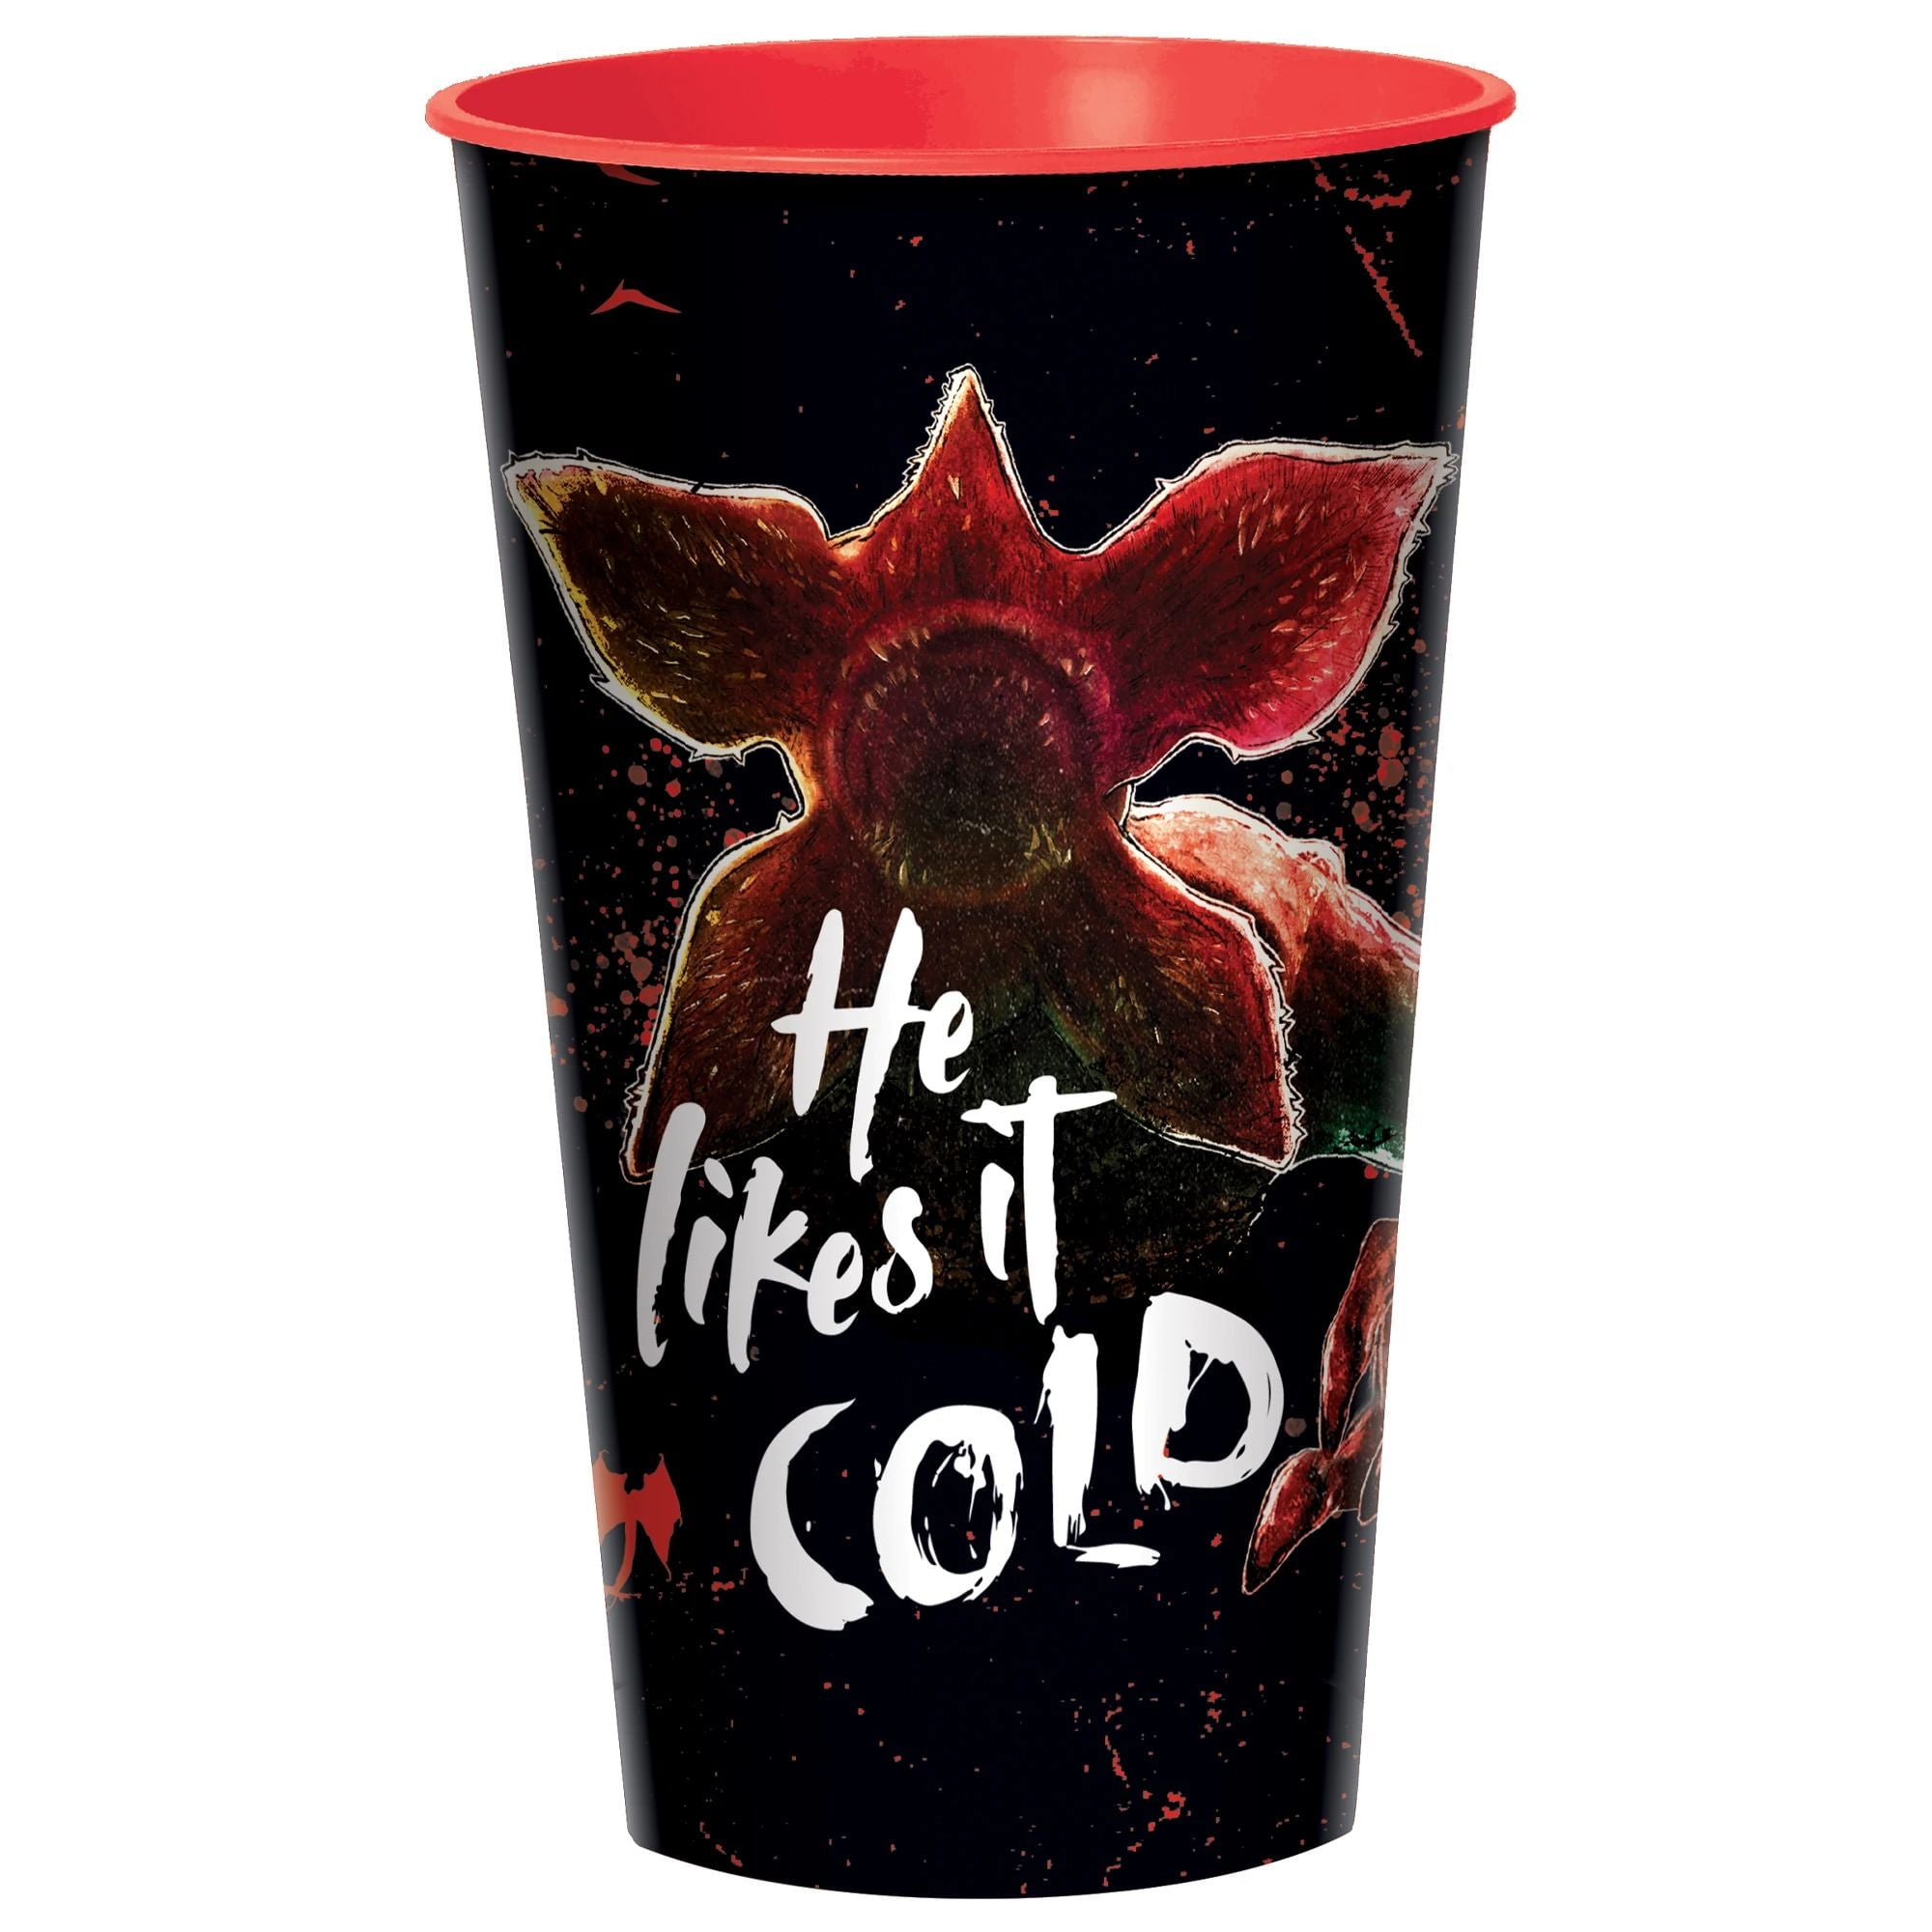 Stranger Things Cup Starbucks Cup Cold Cup Starbucks Cup Demogorgon Ice  Coffee Cup -  Denmark